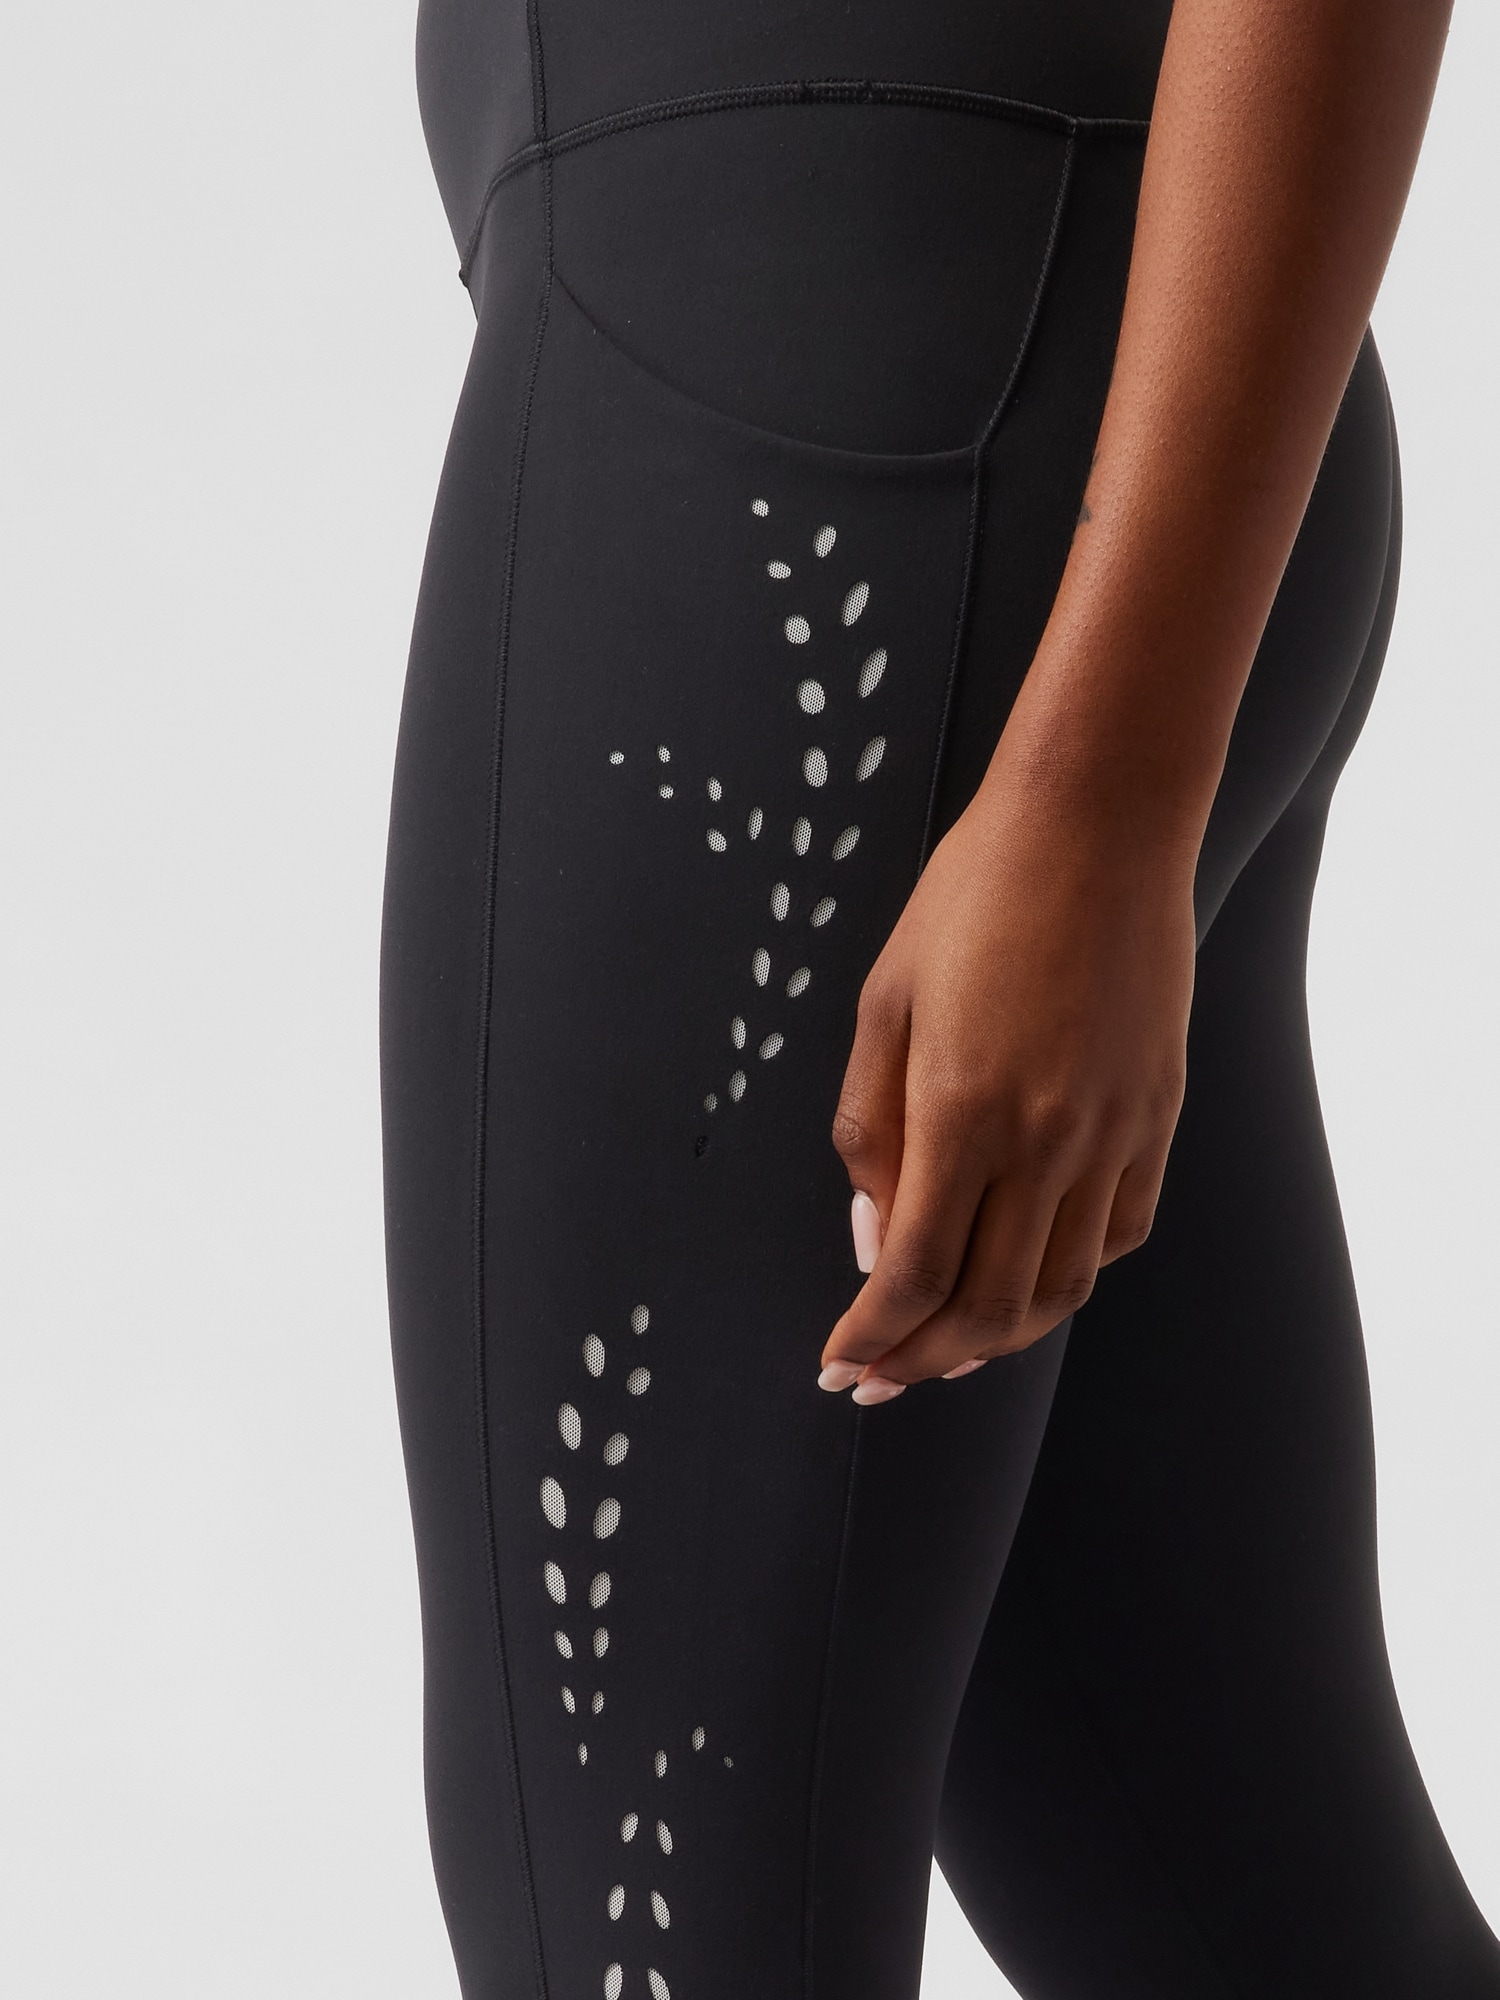 Laser Cut Full Length High Waisted leggings with Pockets - Womens